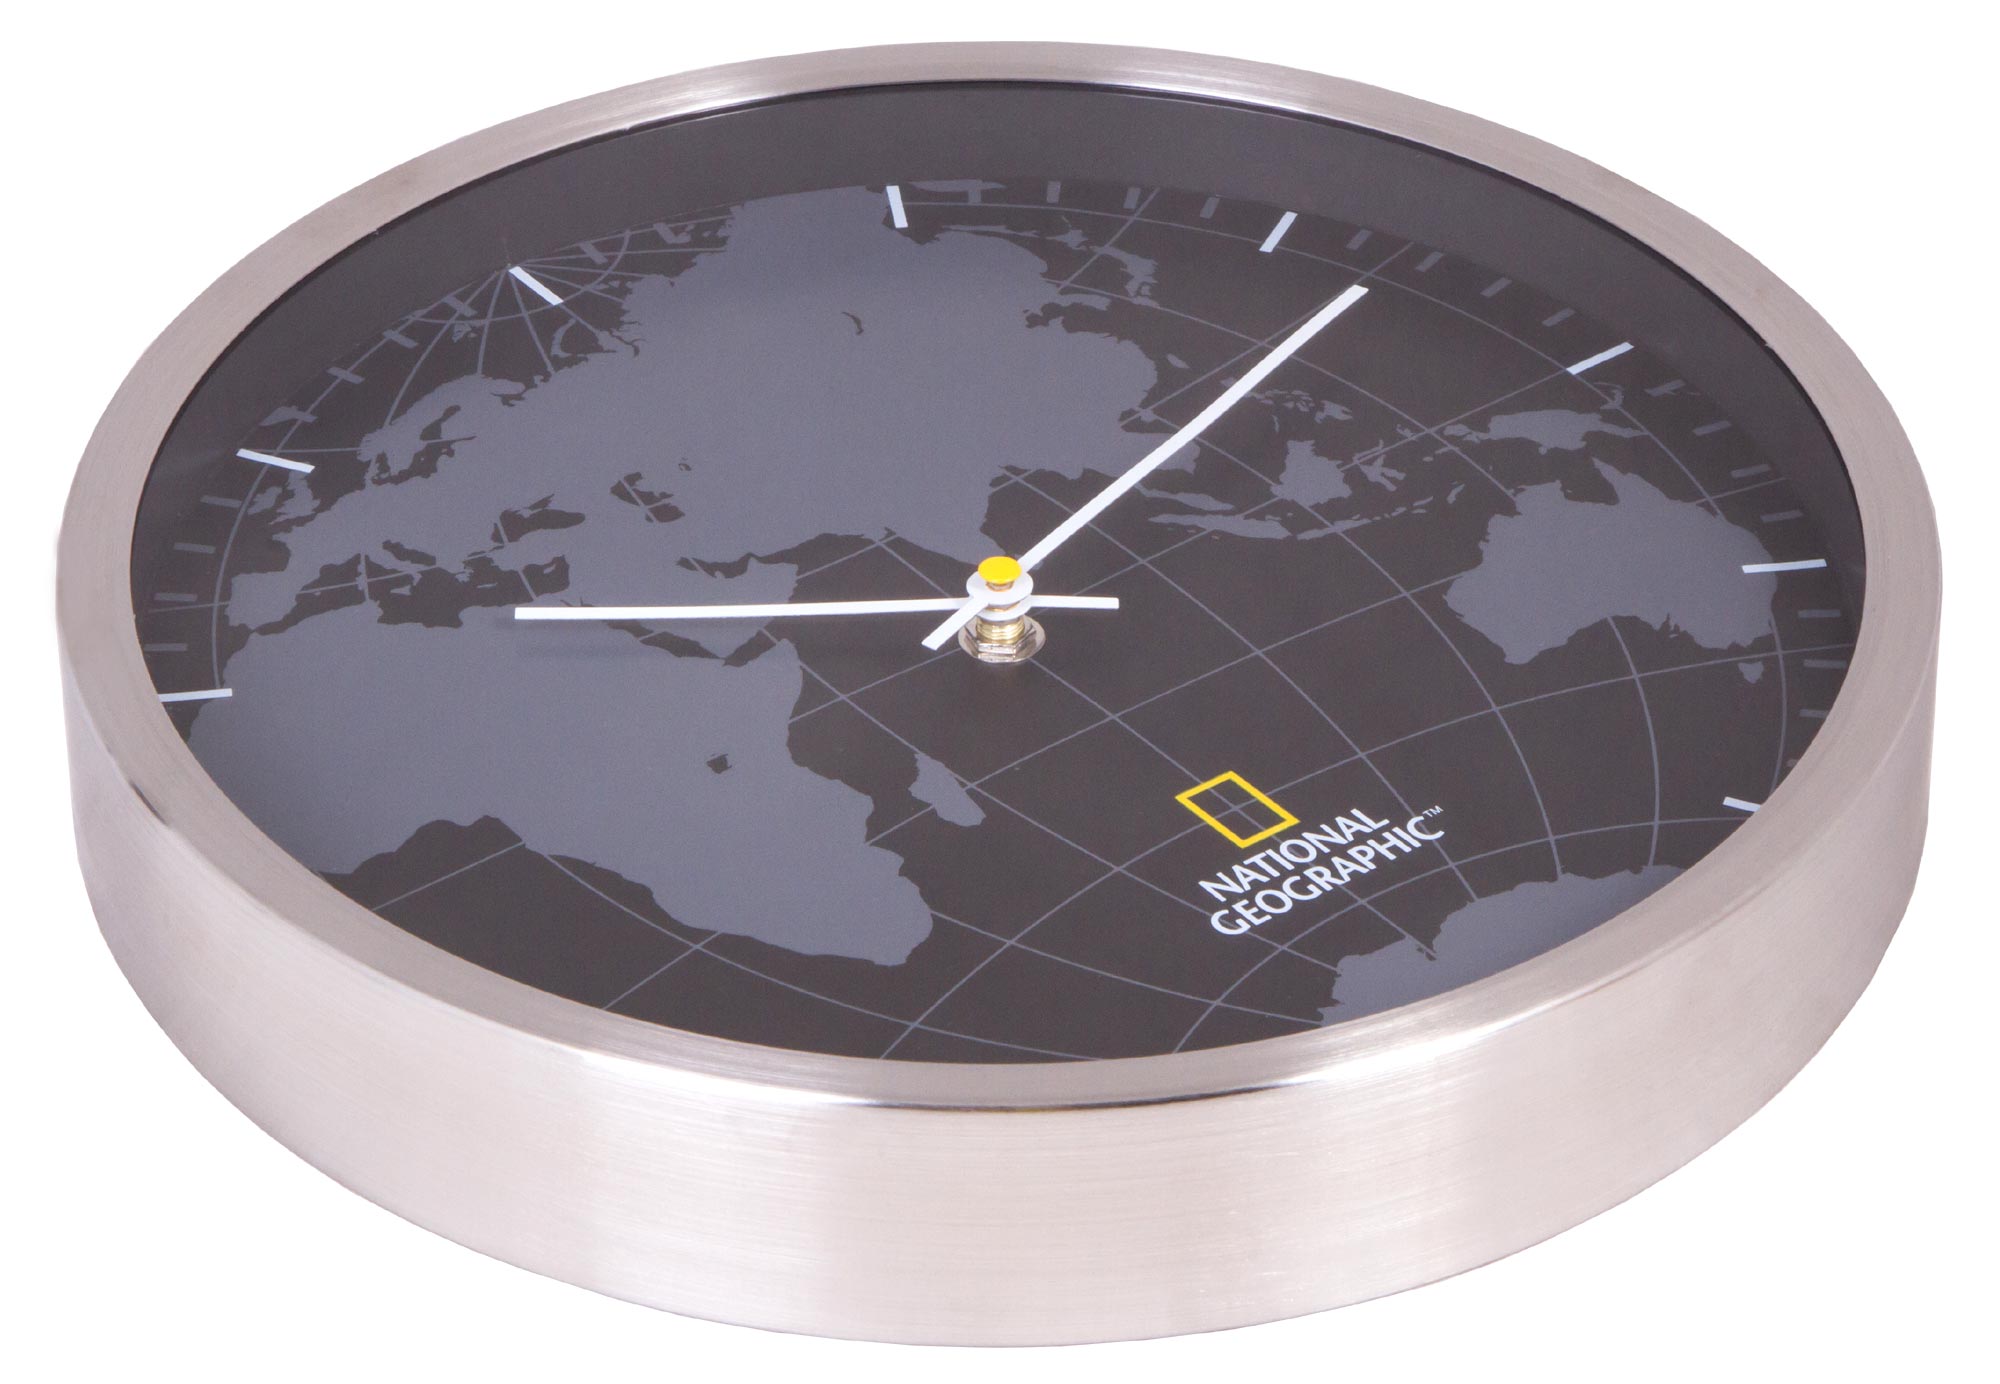 Bresser%20National%20Geographic%20Wall%20Clock%2030cm